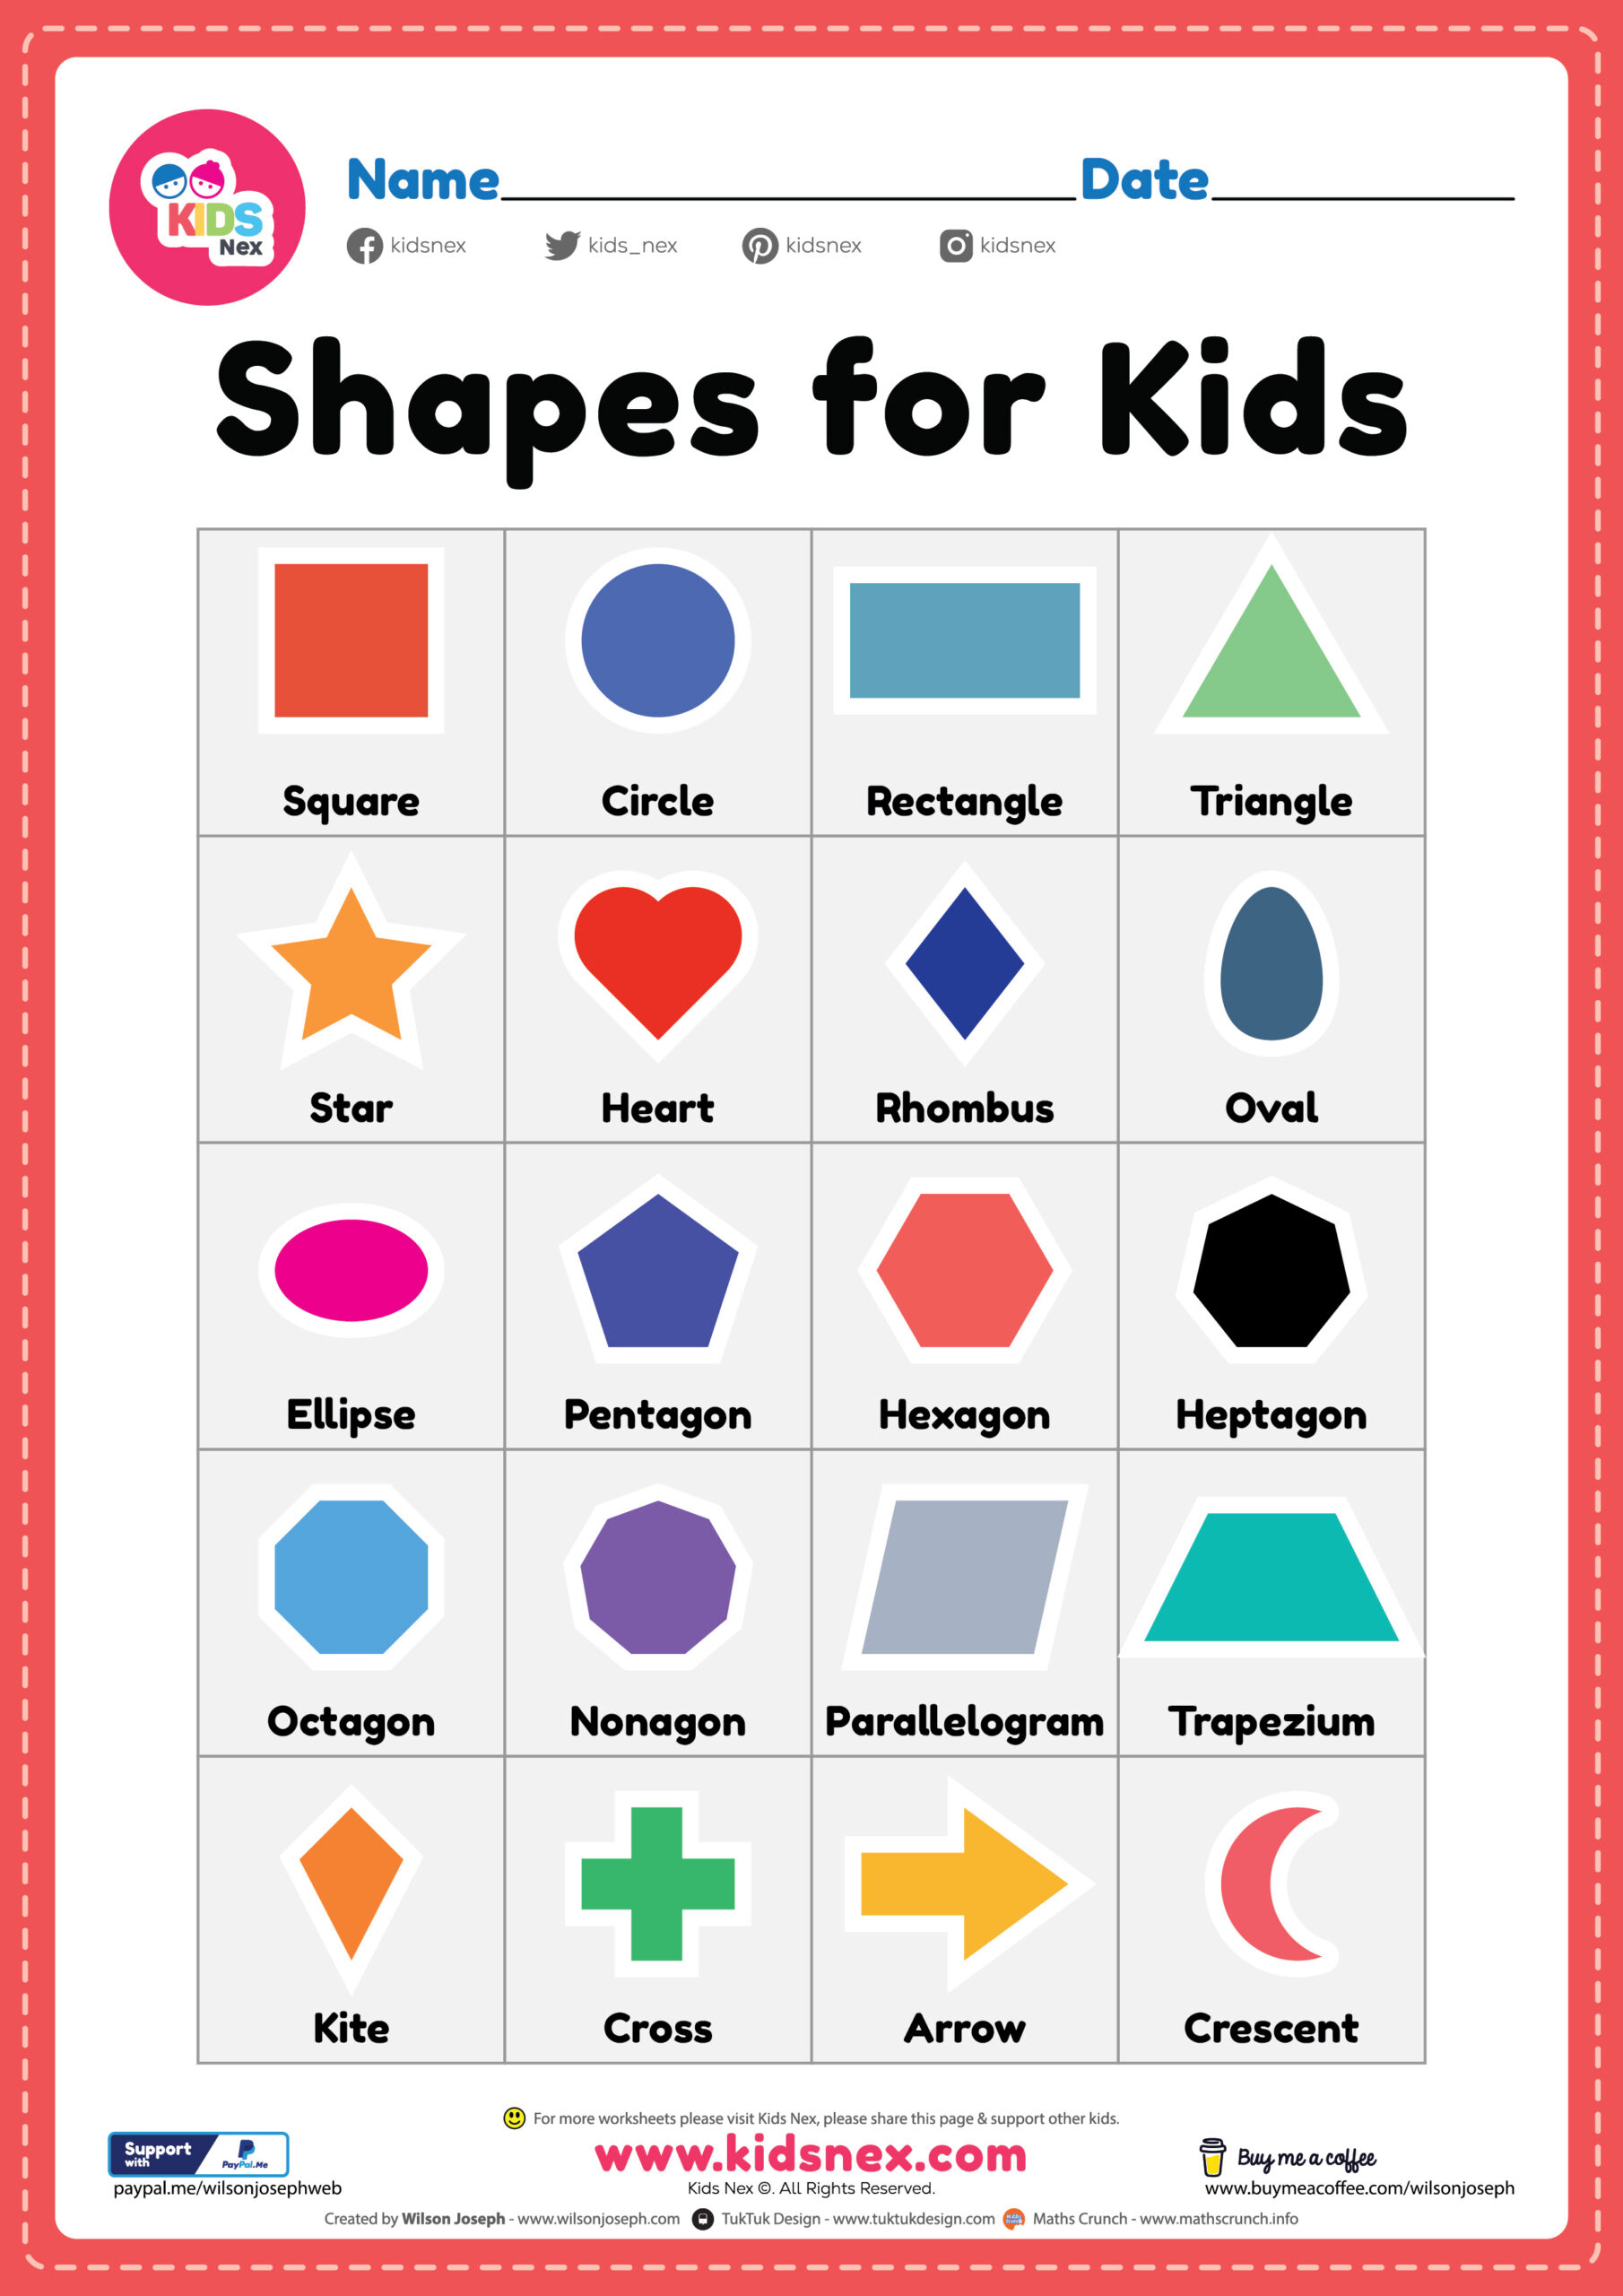 2d-and-3d-shapes-educational-chart-poster-13x19-walmart